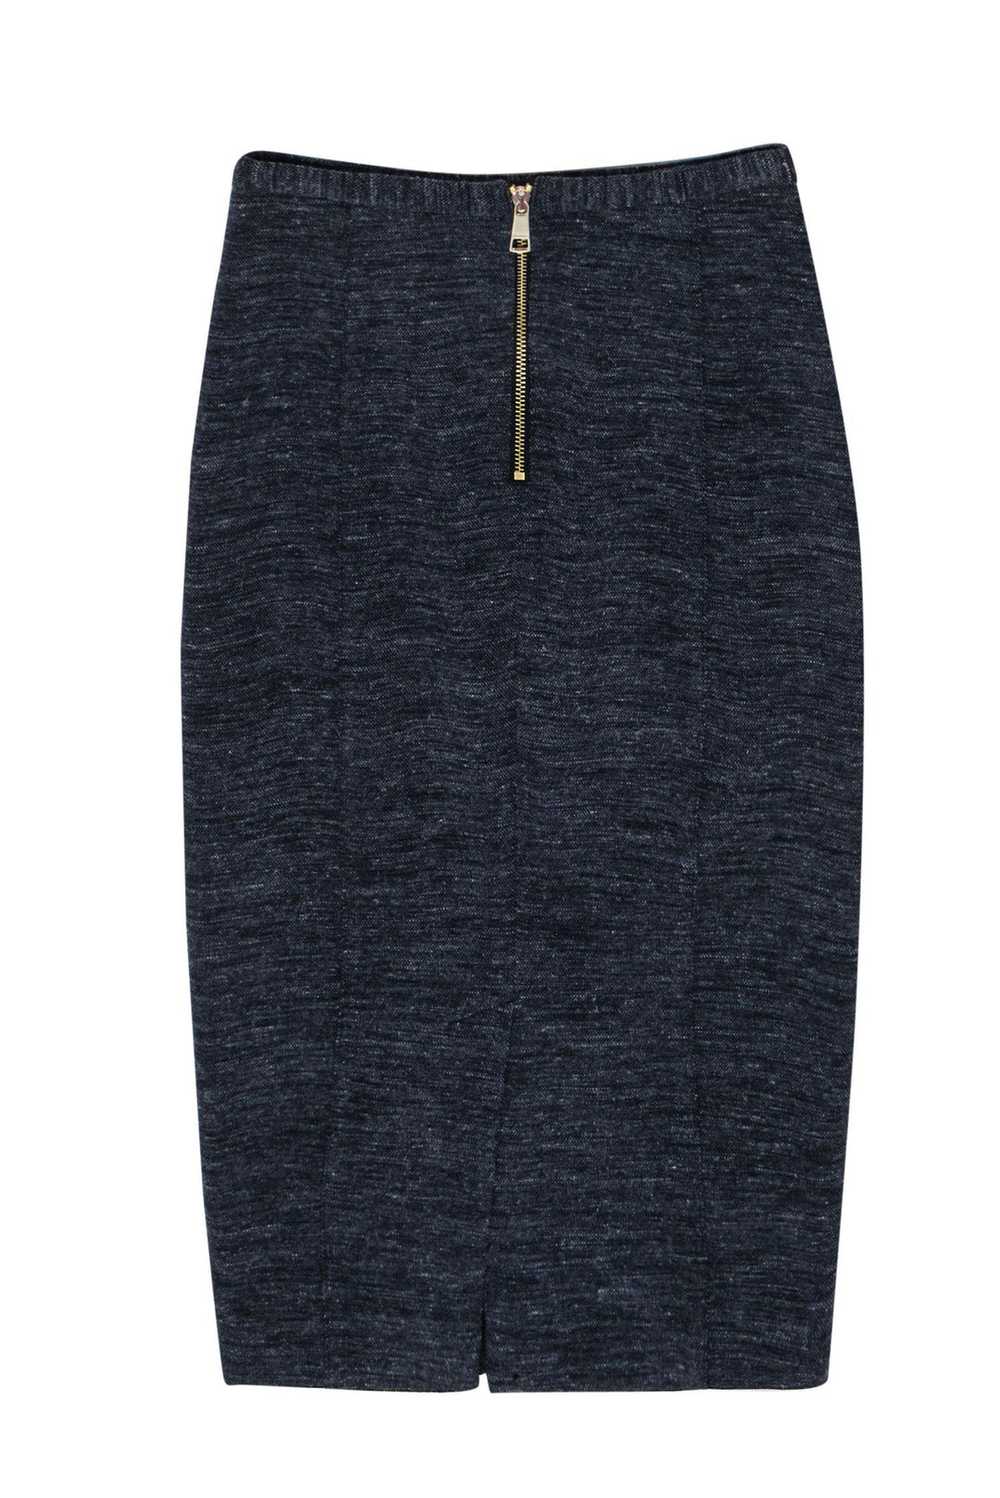 Burberry - Dark Blue Pencil Skirt w/ Leather Bow … - image 2